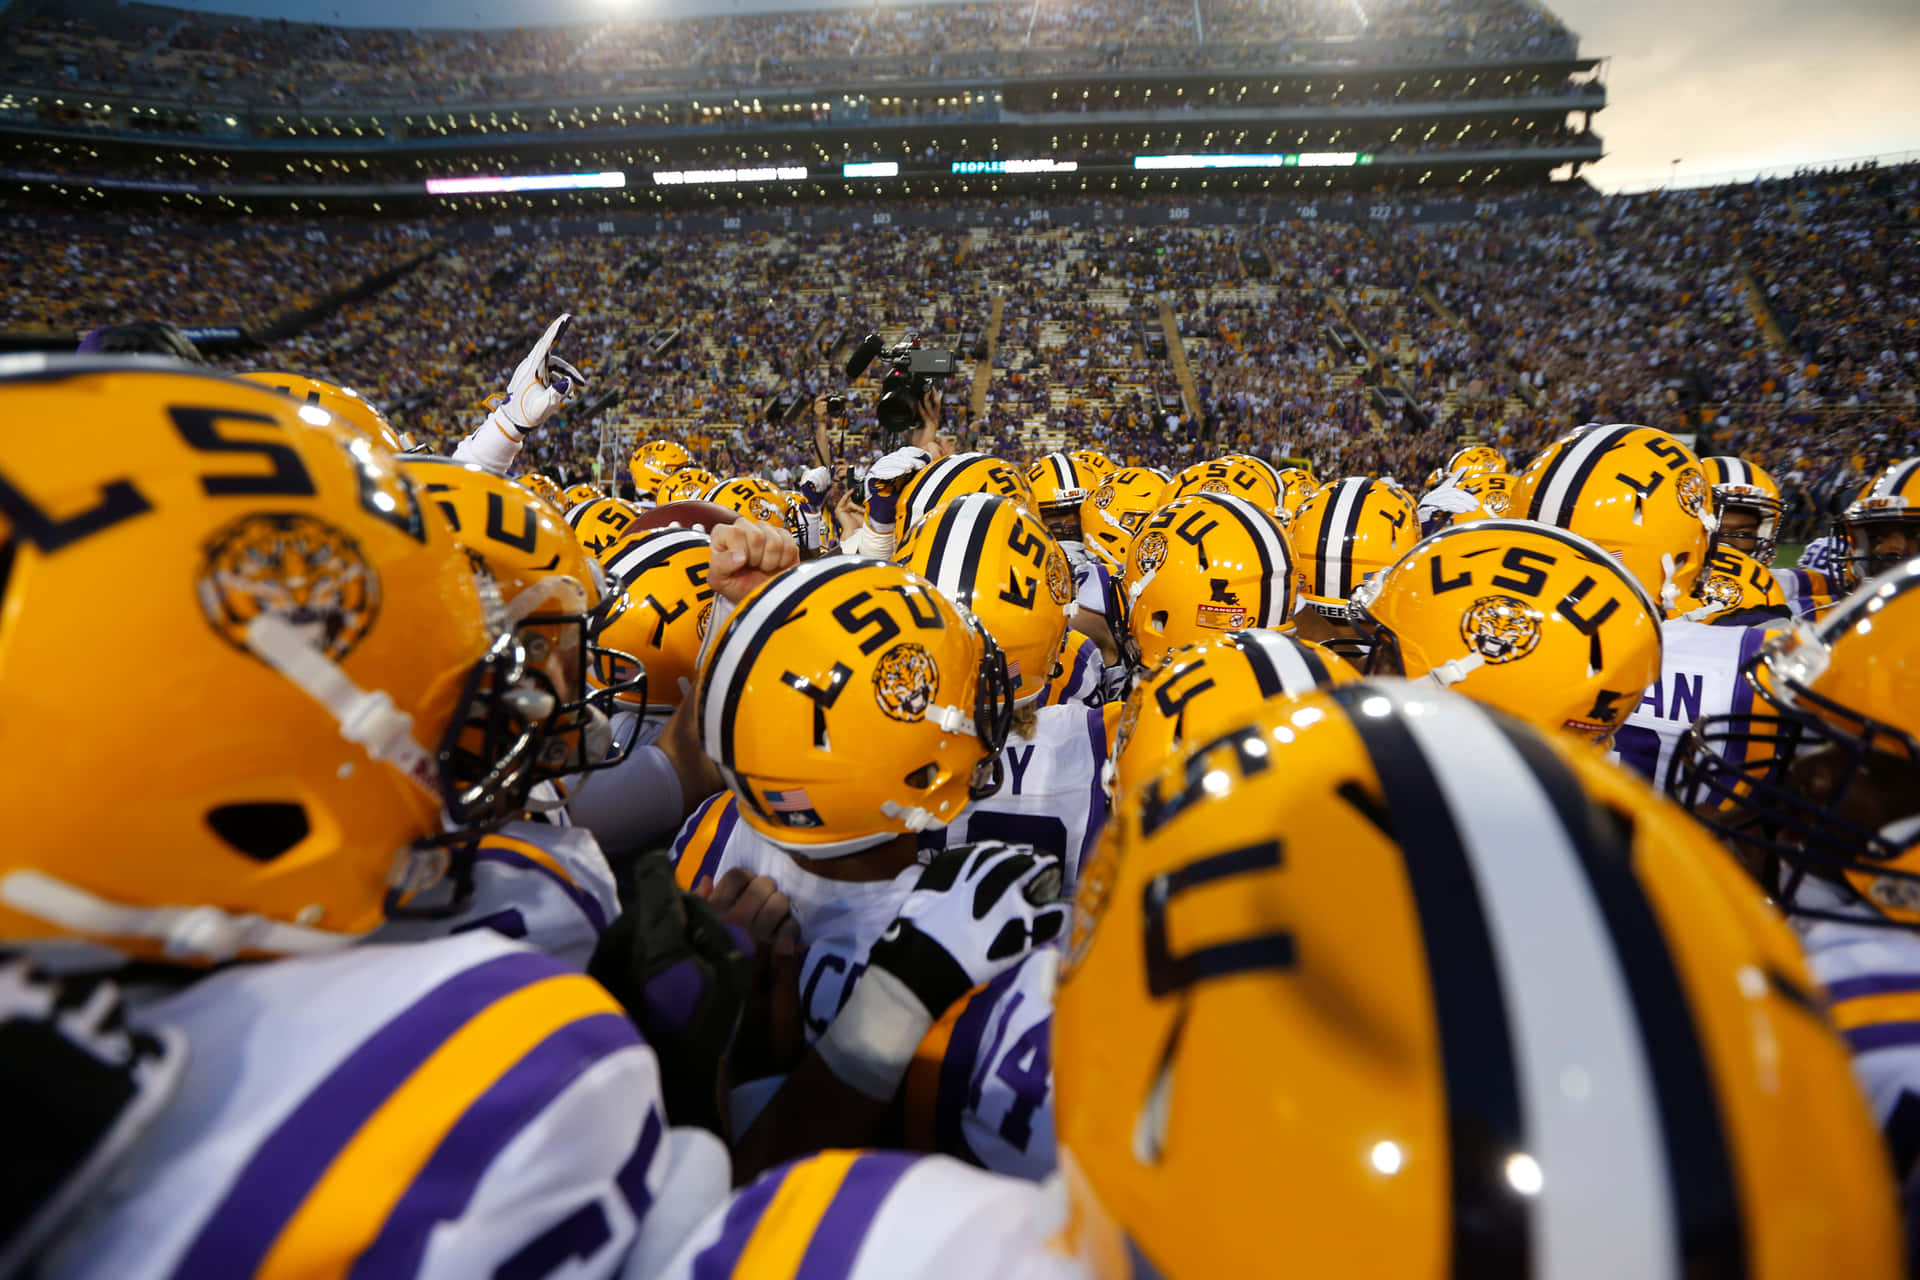 Lsu Football Clumped Together Wallpaper